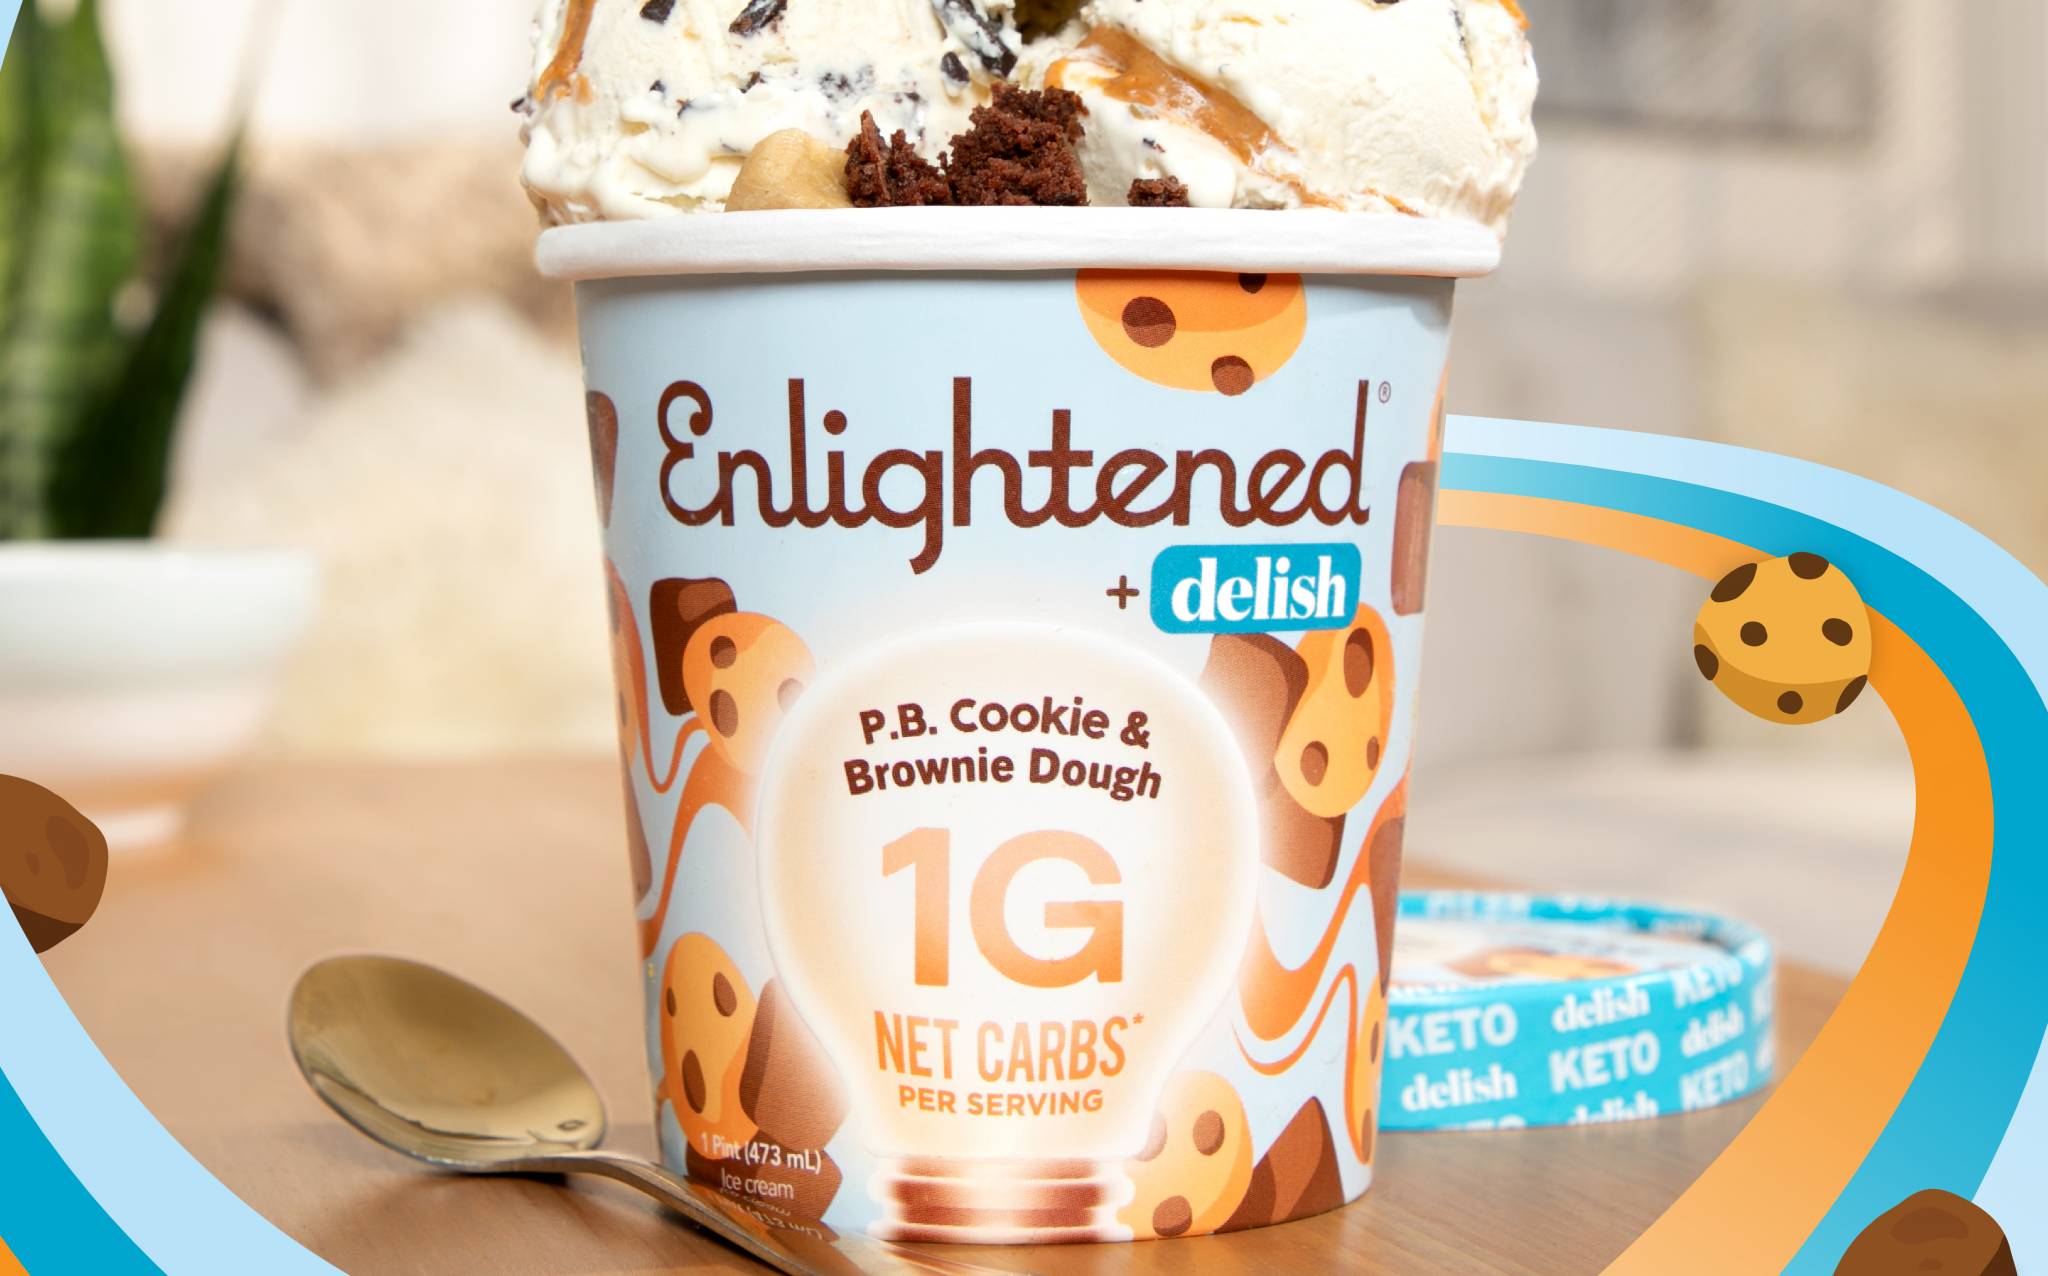 Enlightened and Delish partner to debut new keto-friendly flavour